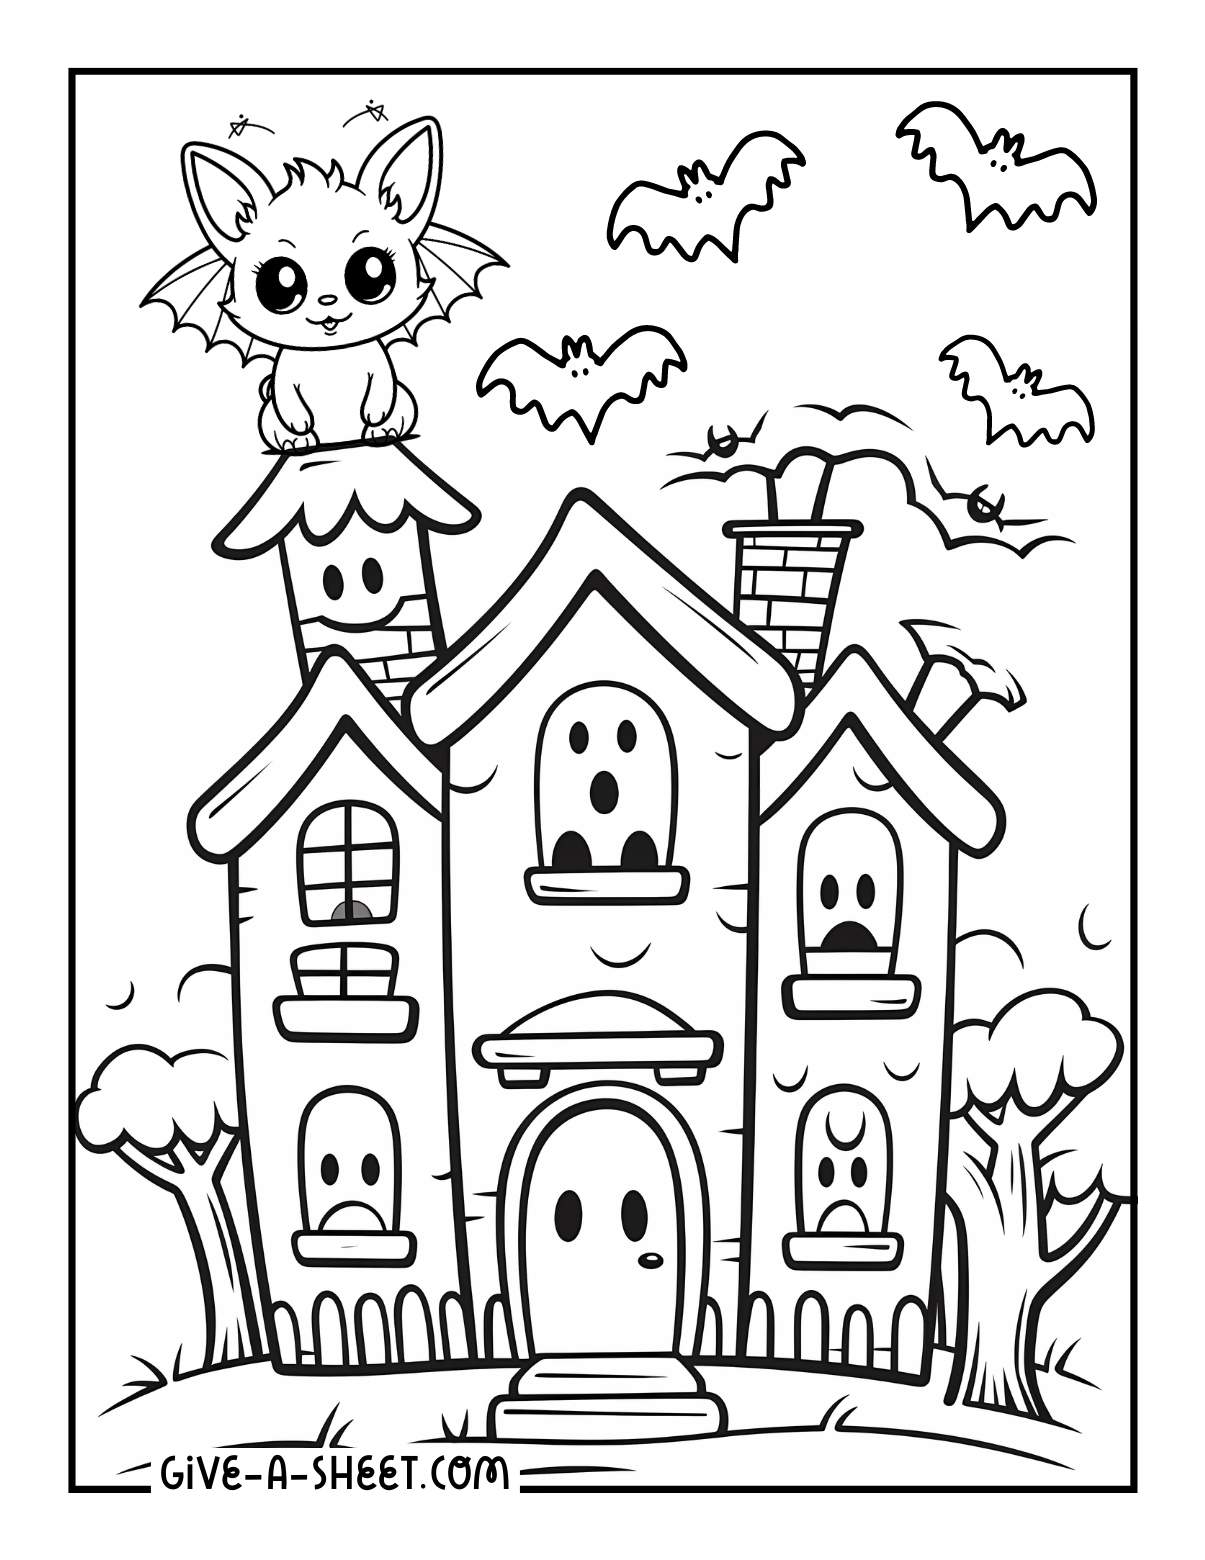 Free halloween printables haunted house friendly bats coloring page.